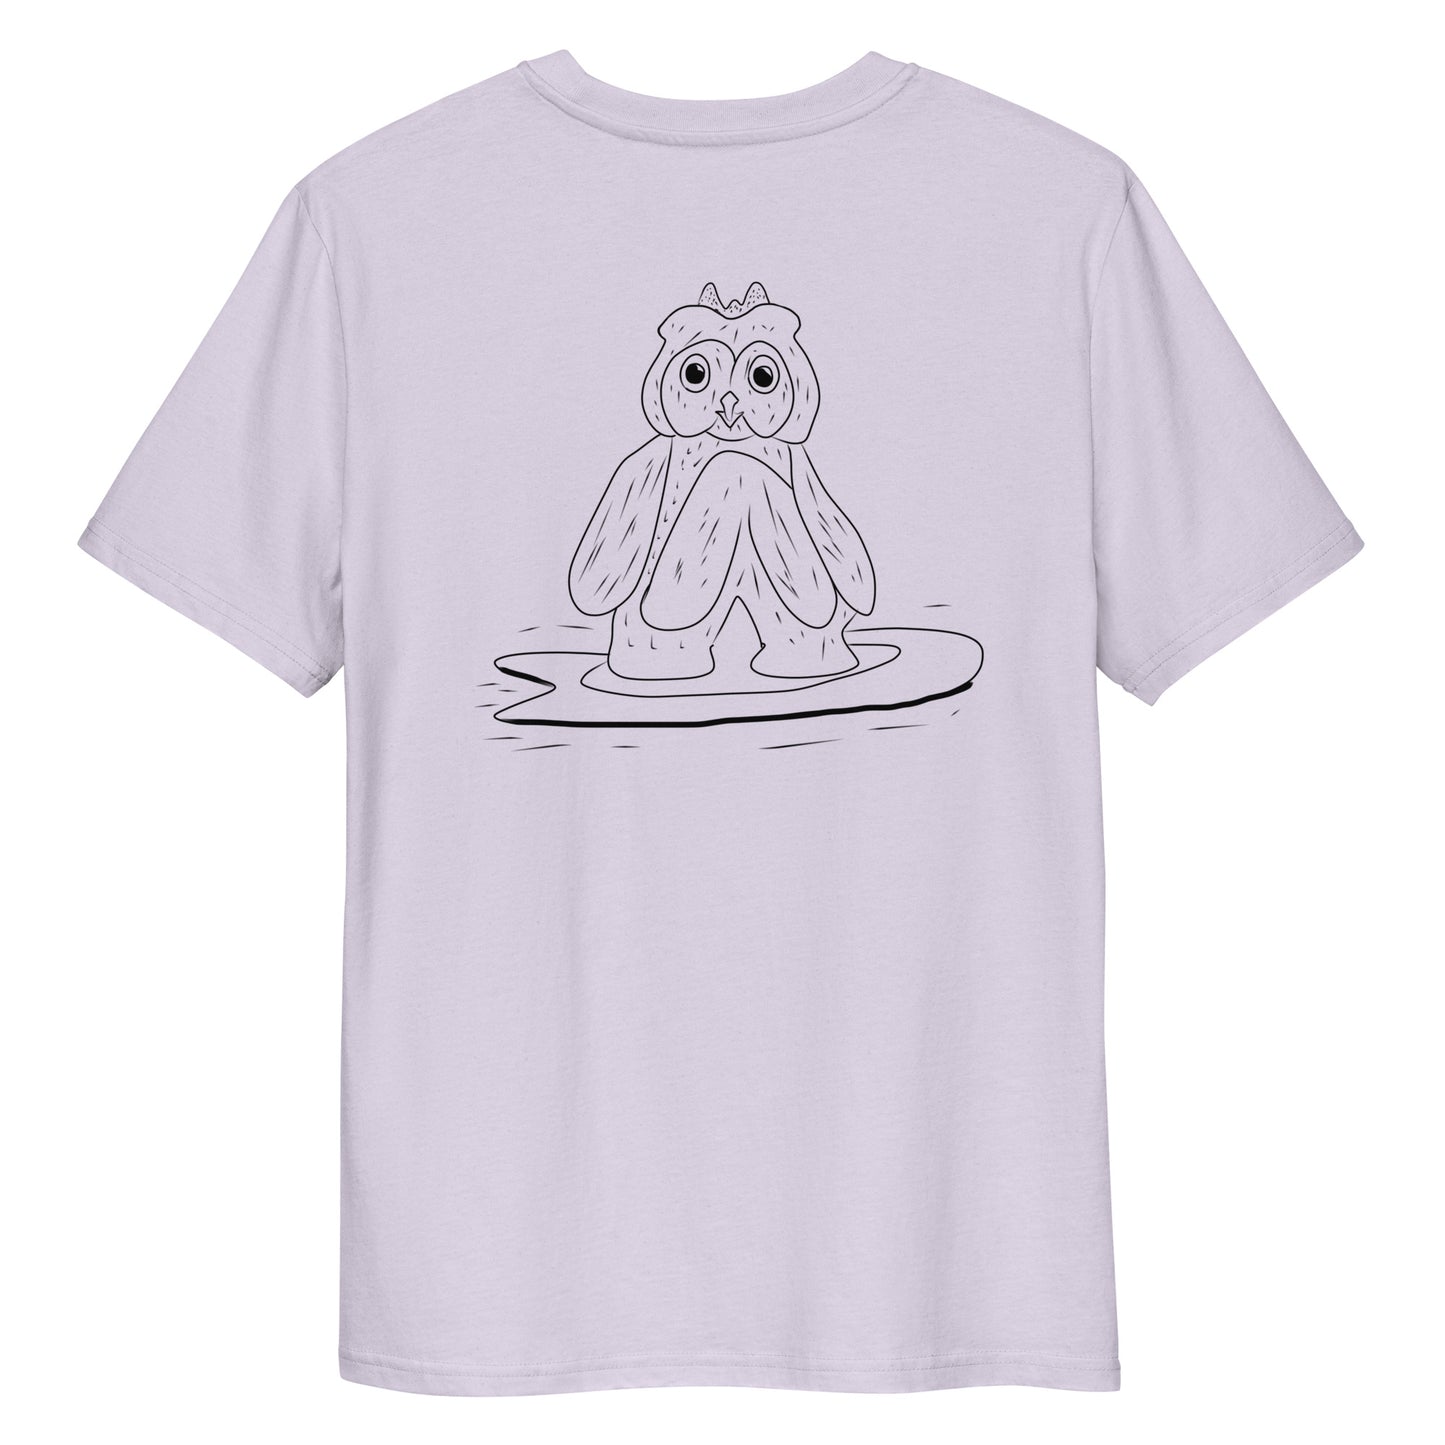 Surfing Owl | 100% Organic Cotton T Shirt in lavender back